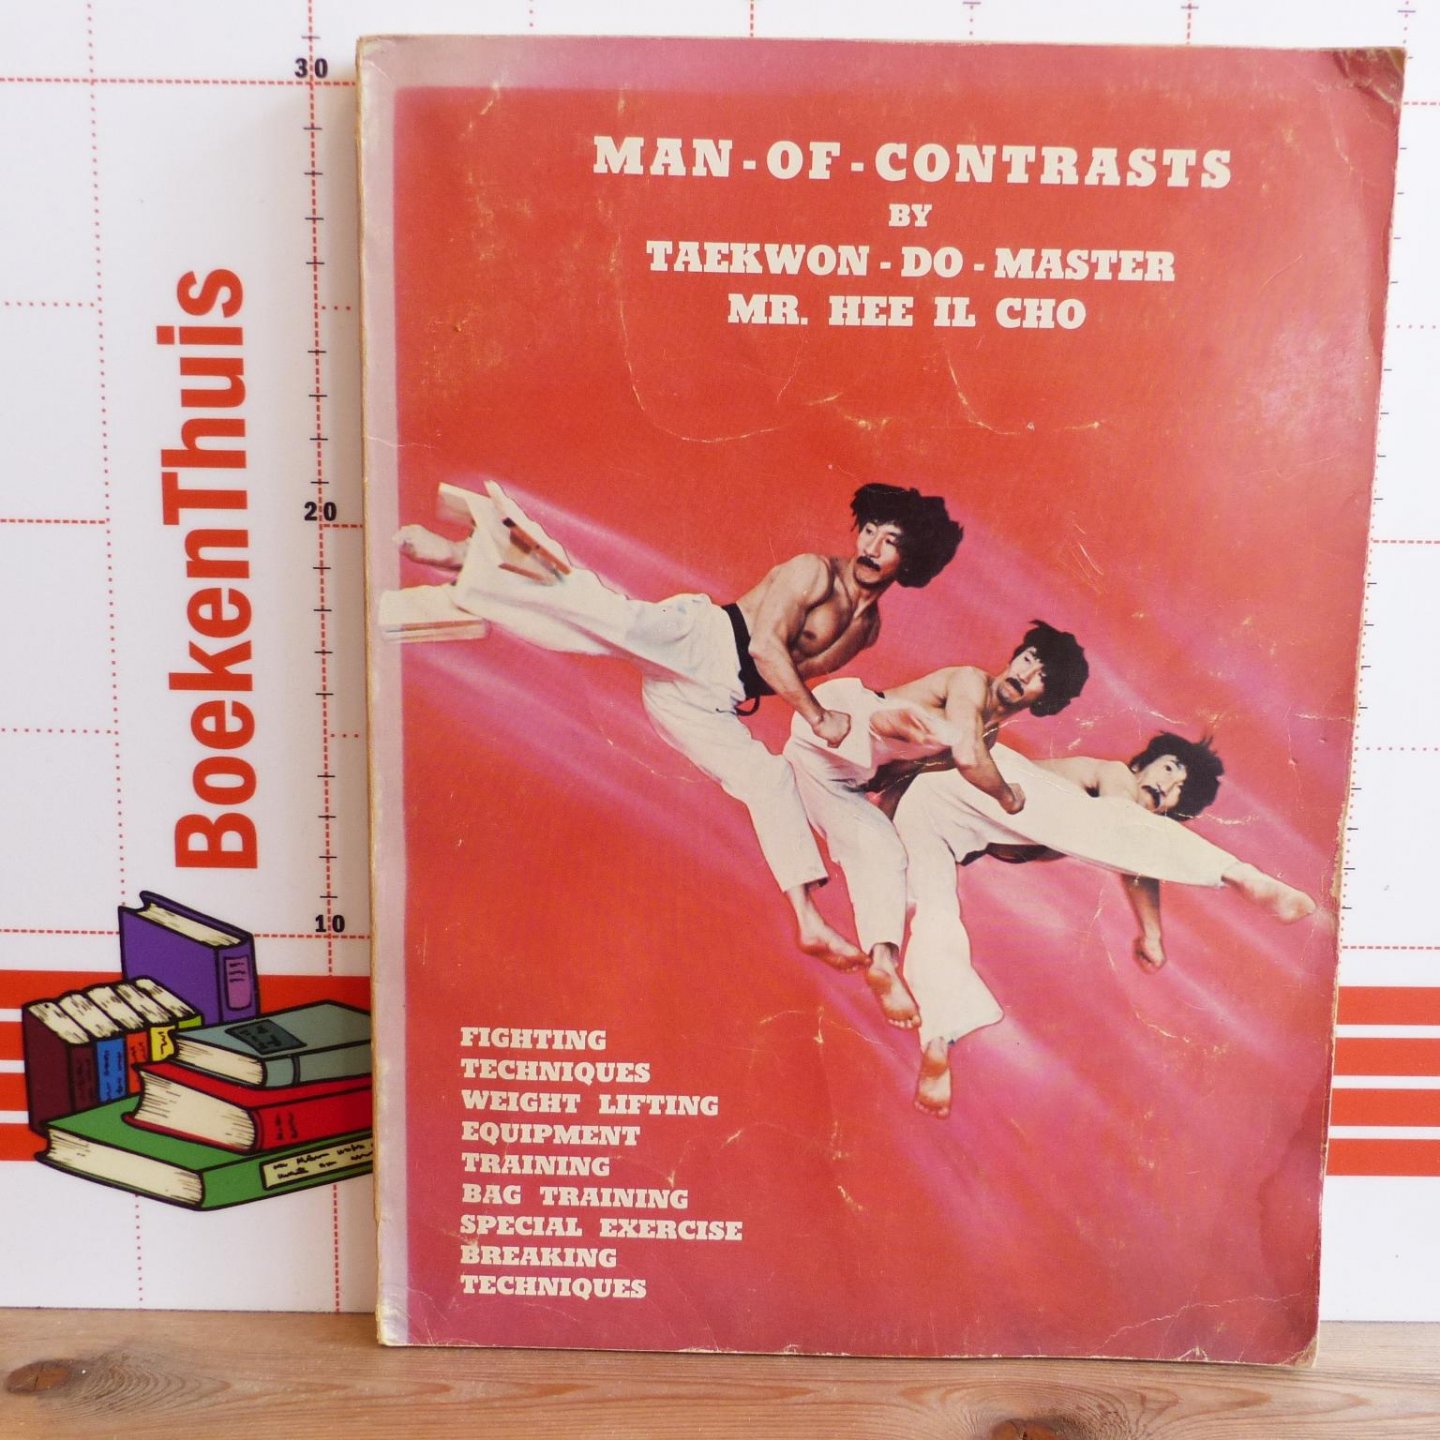 Cho, Hee Il - man of contrasts by teakwon do master mr. Hee Il Cho